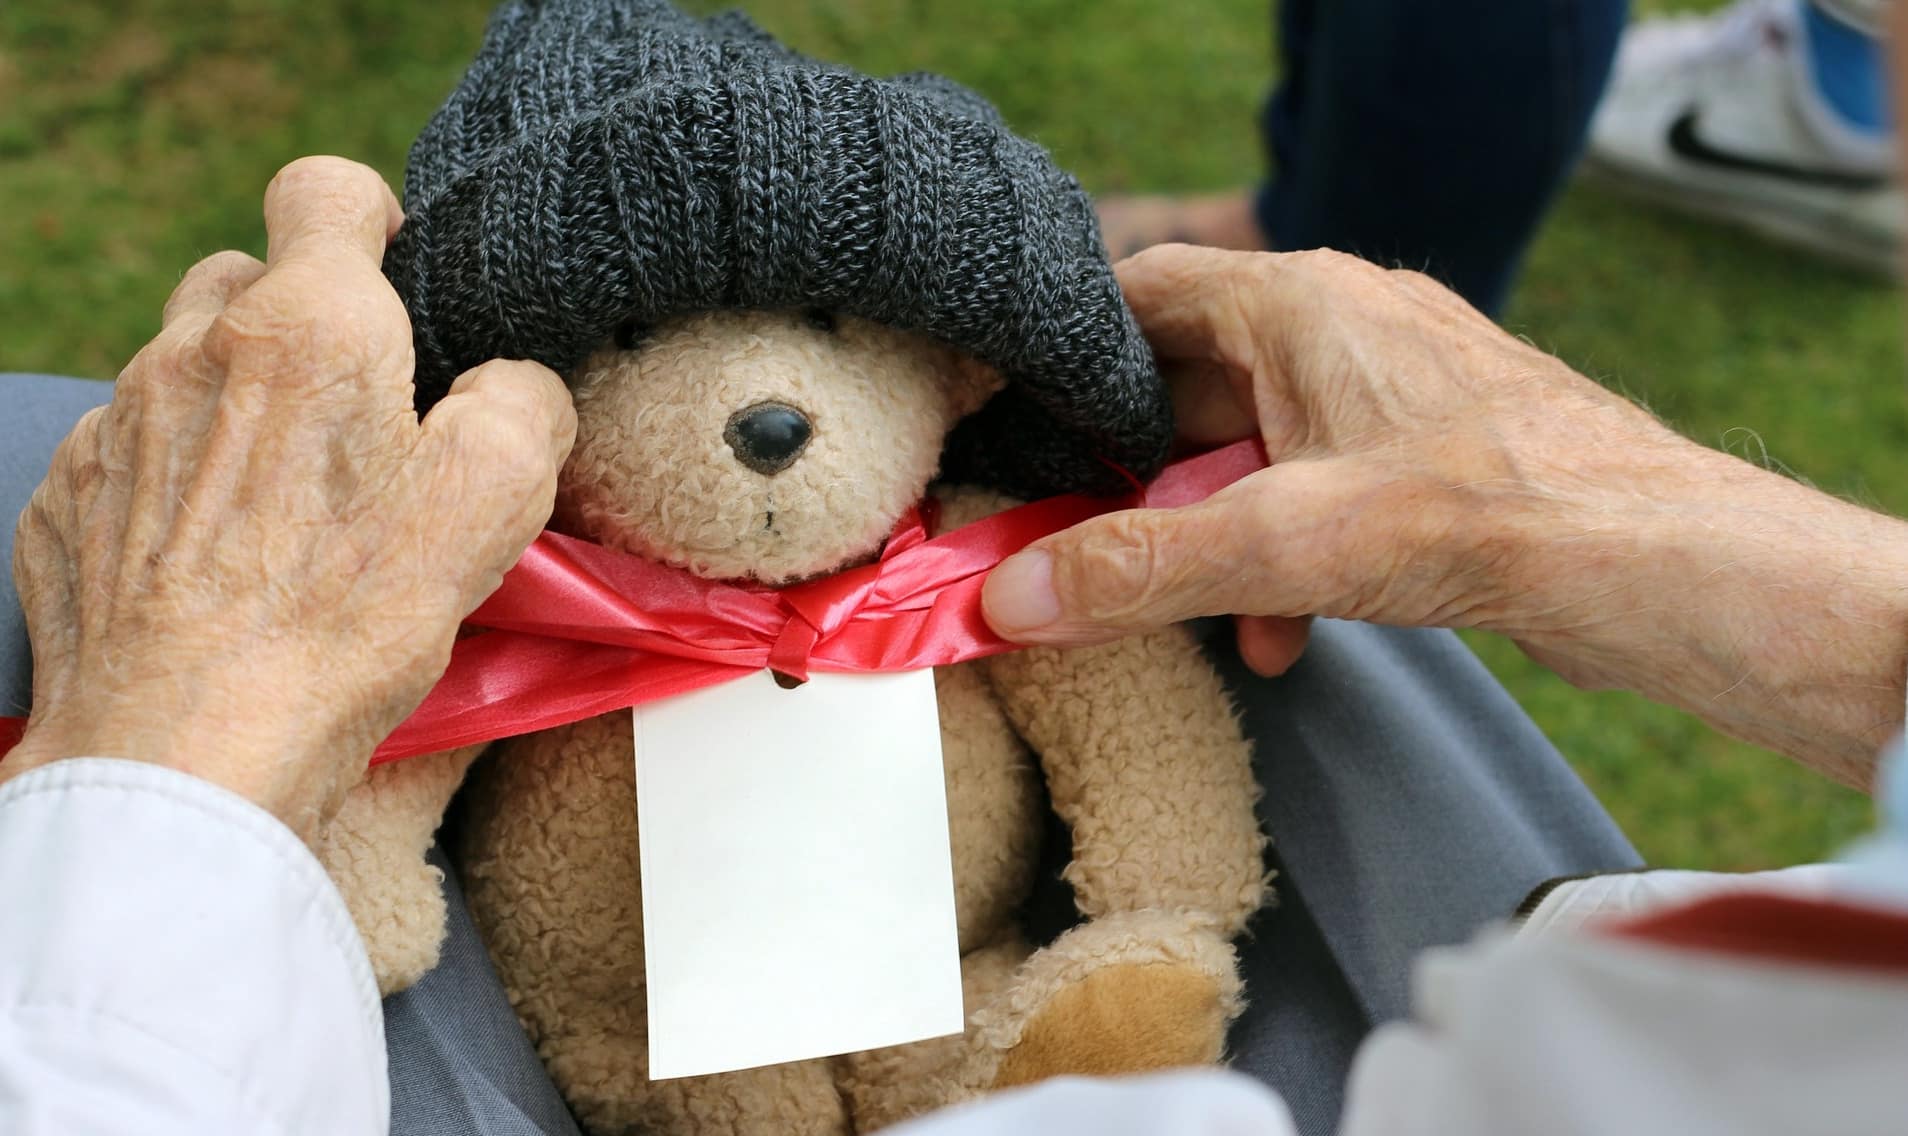 This elderly person has a gift from a loved one who wonders, how will I know if a nursing home is safe?